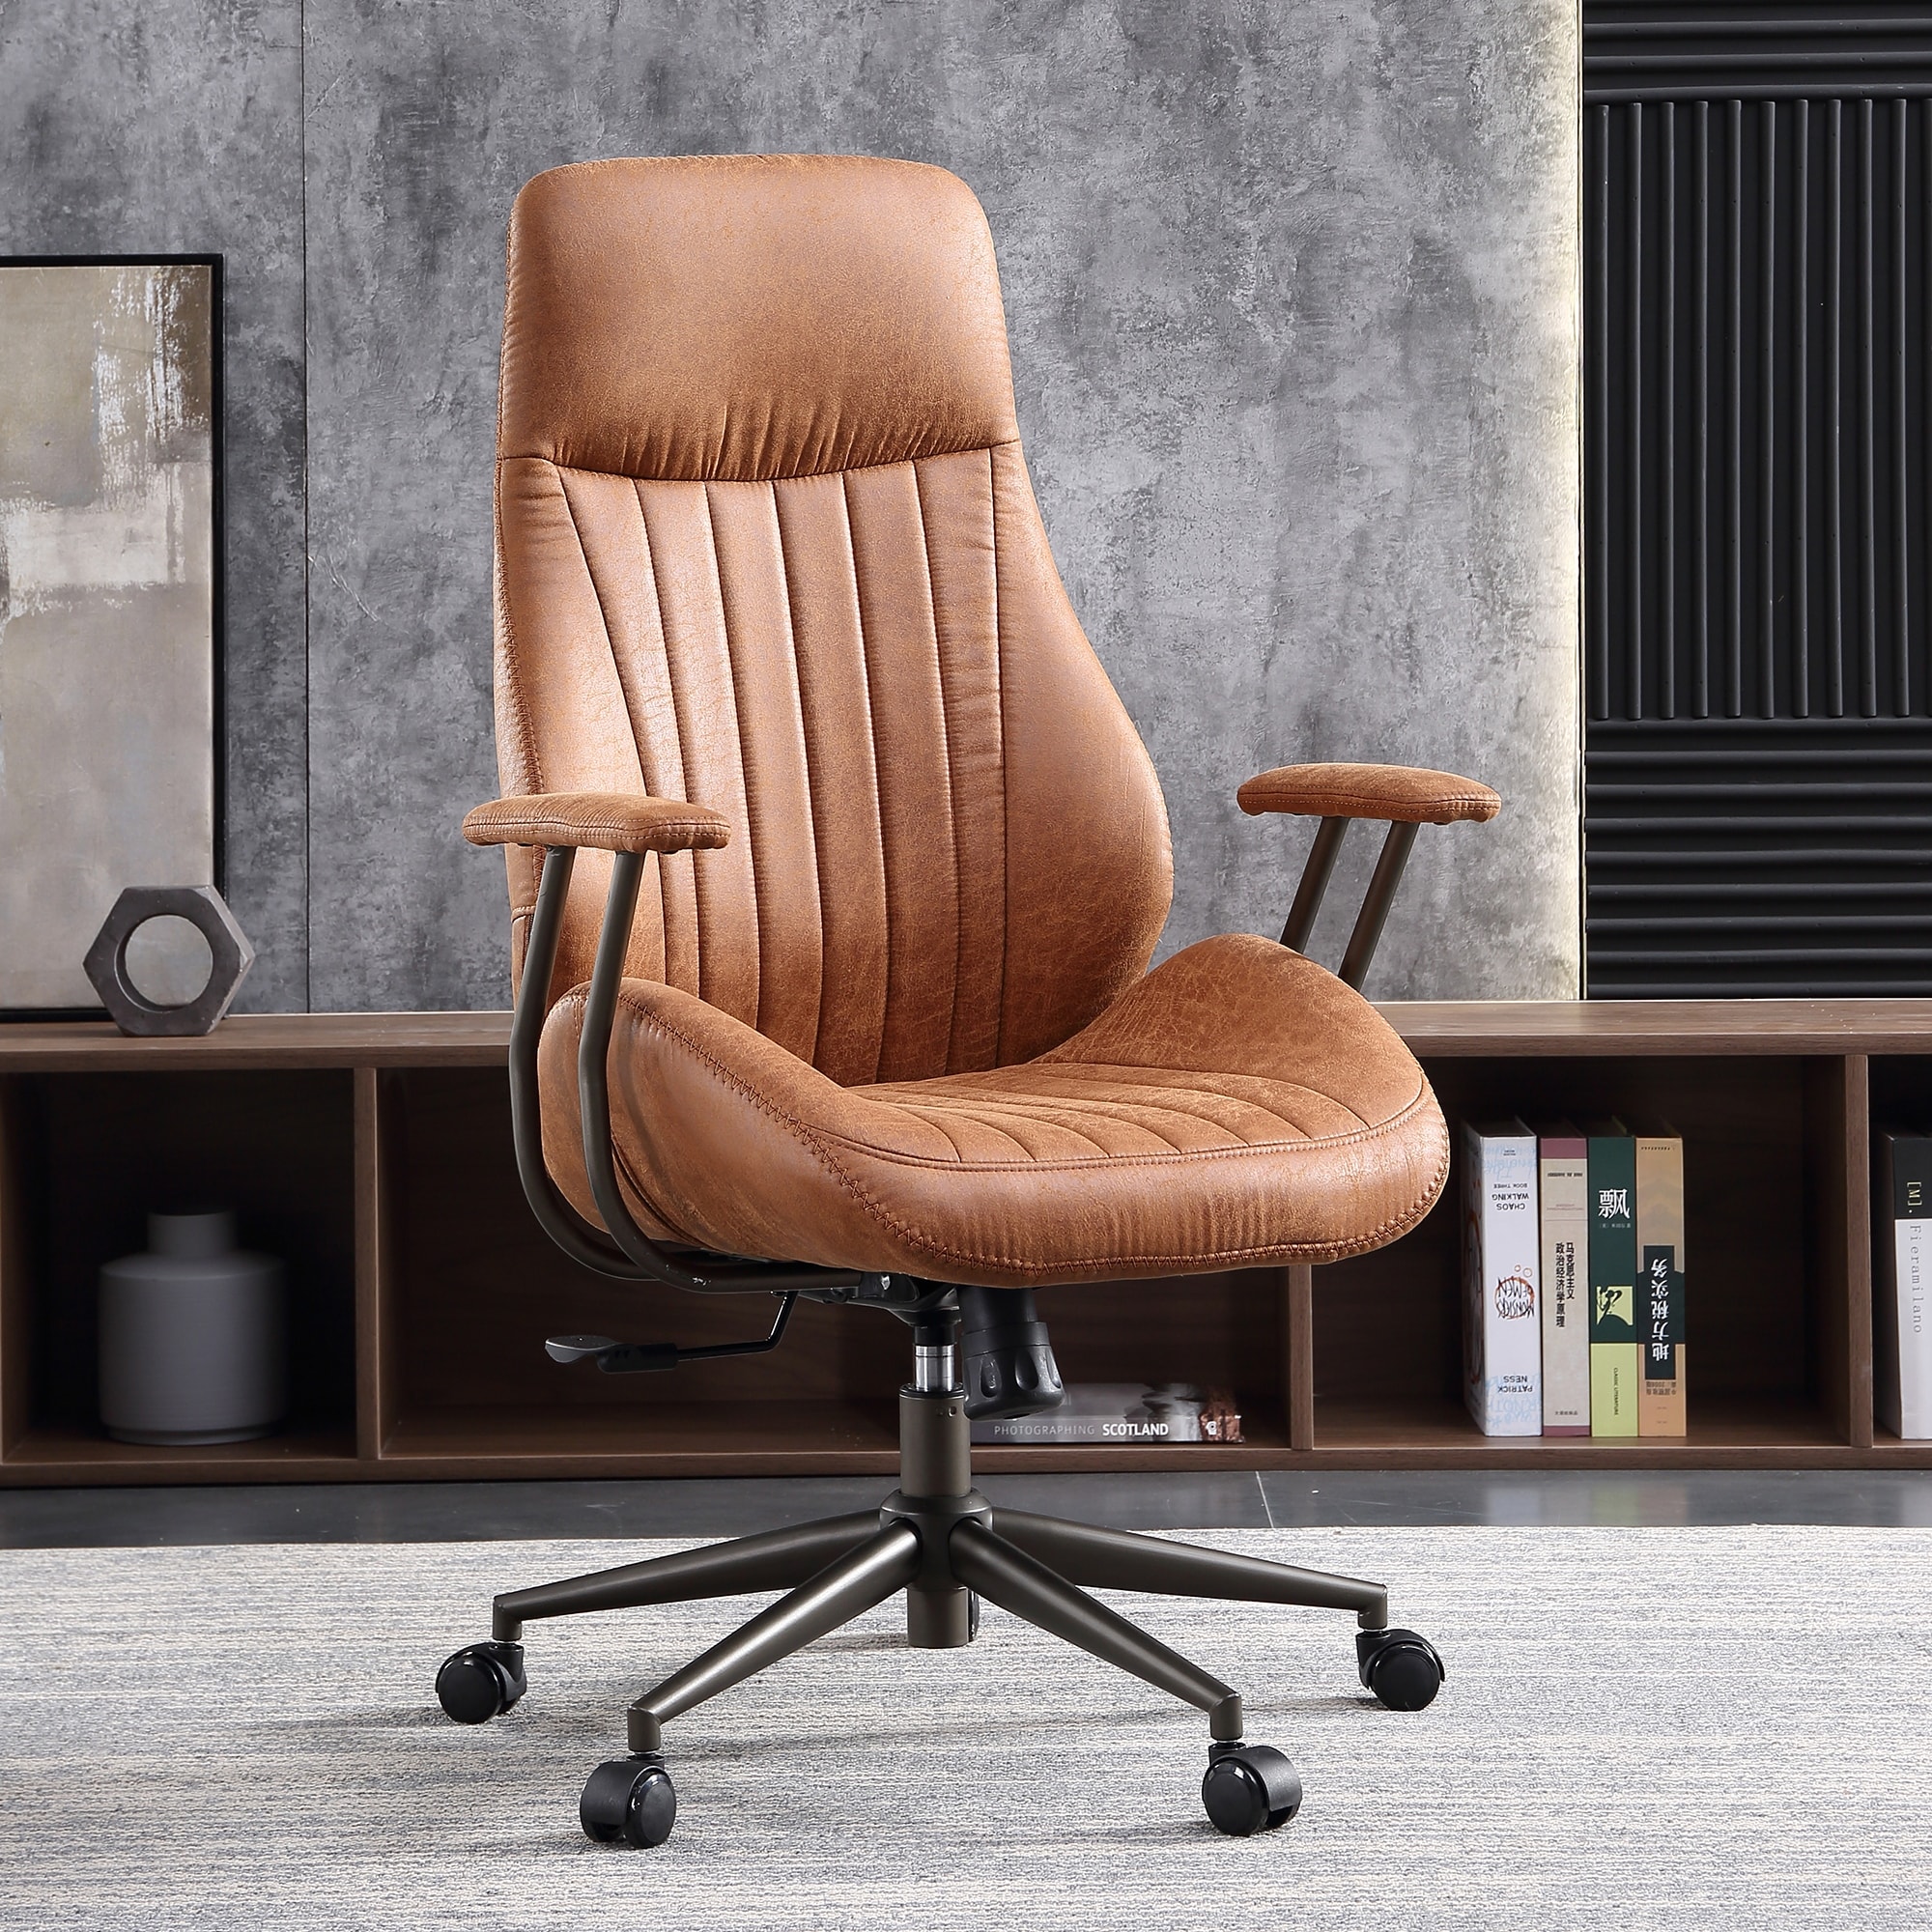 https://ak1.ostkcdn.com/images/products/is/images/direct/6be94e72c261217e1c8ce5ec83fe80c1cf035d7d/OVIOS-Suede-Fabric-Ergonomic-Office-Chair-High-Back-Lumbar-Support.jpg